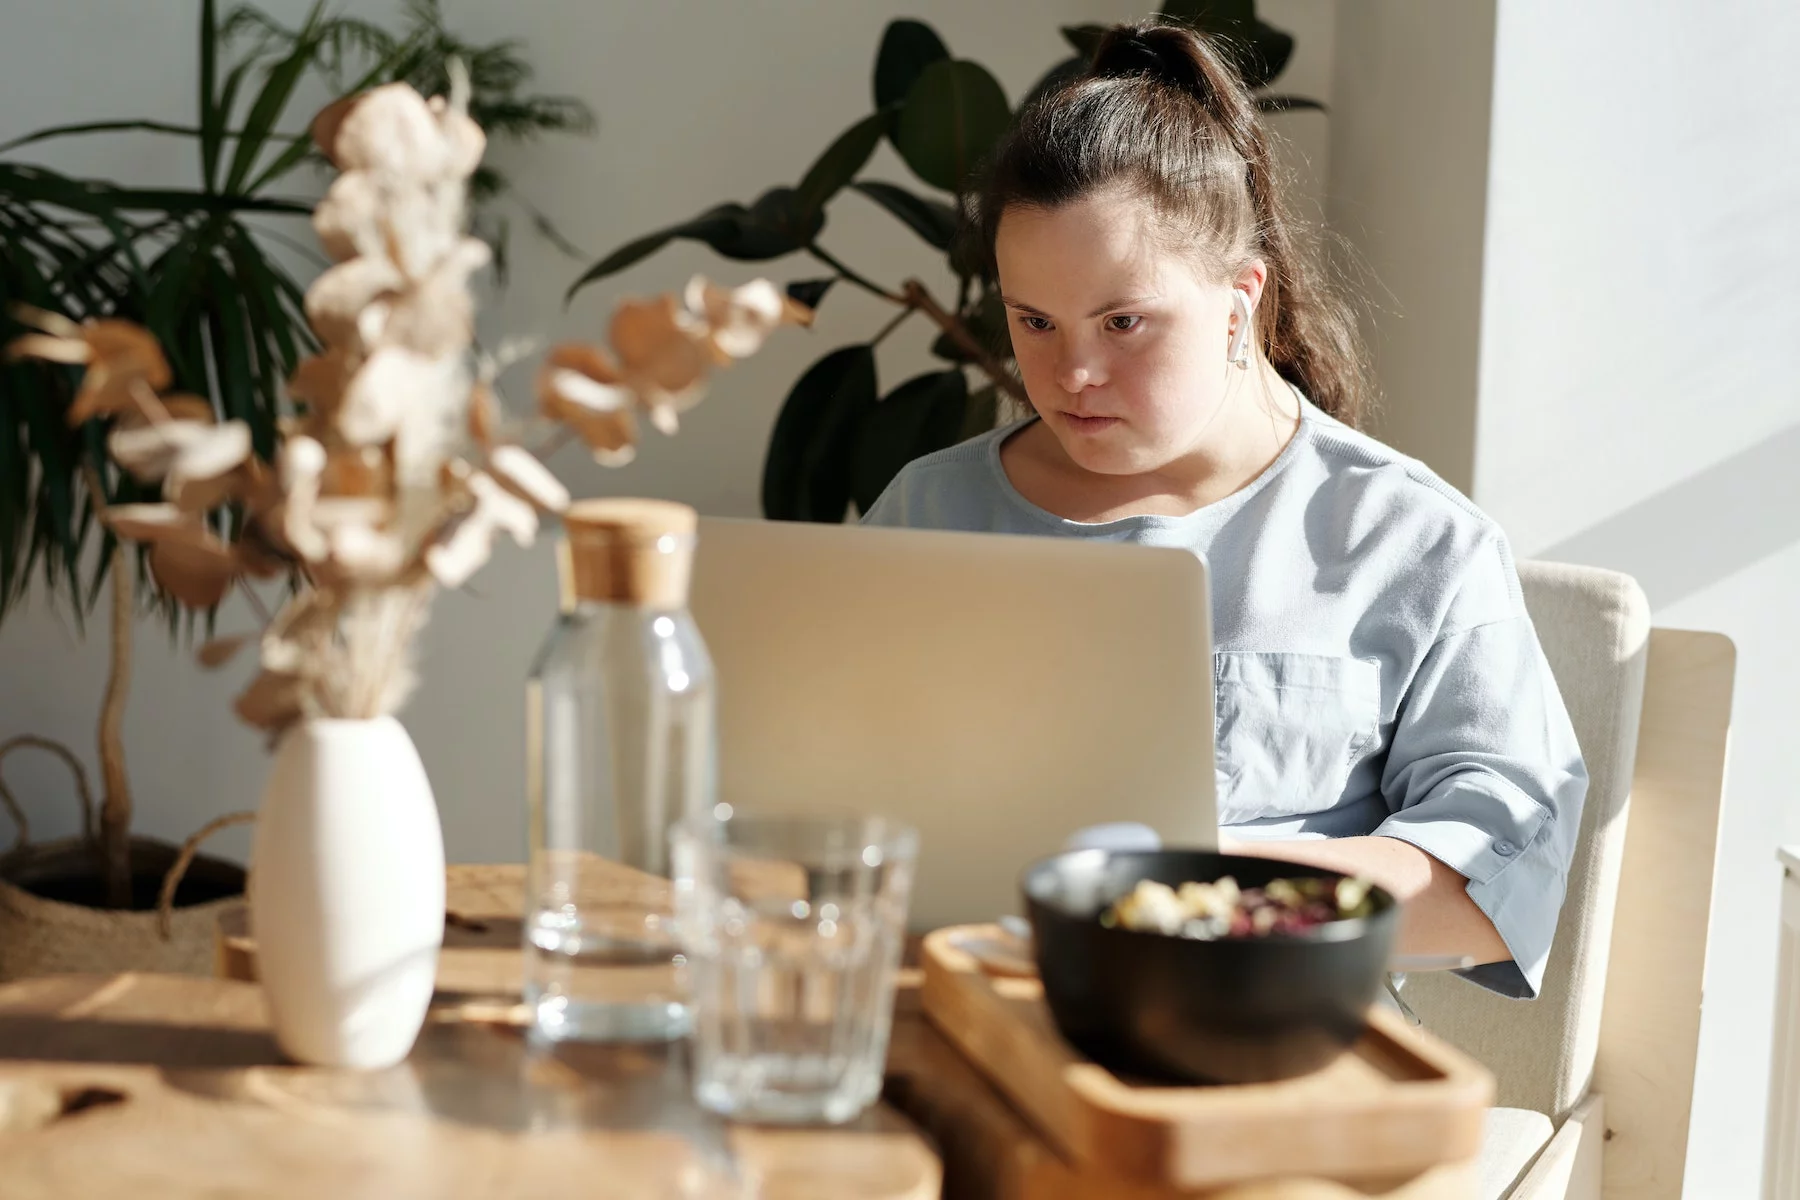 a woman sits working on her laptop at a cafe with plants in the background